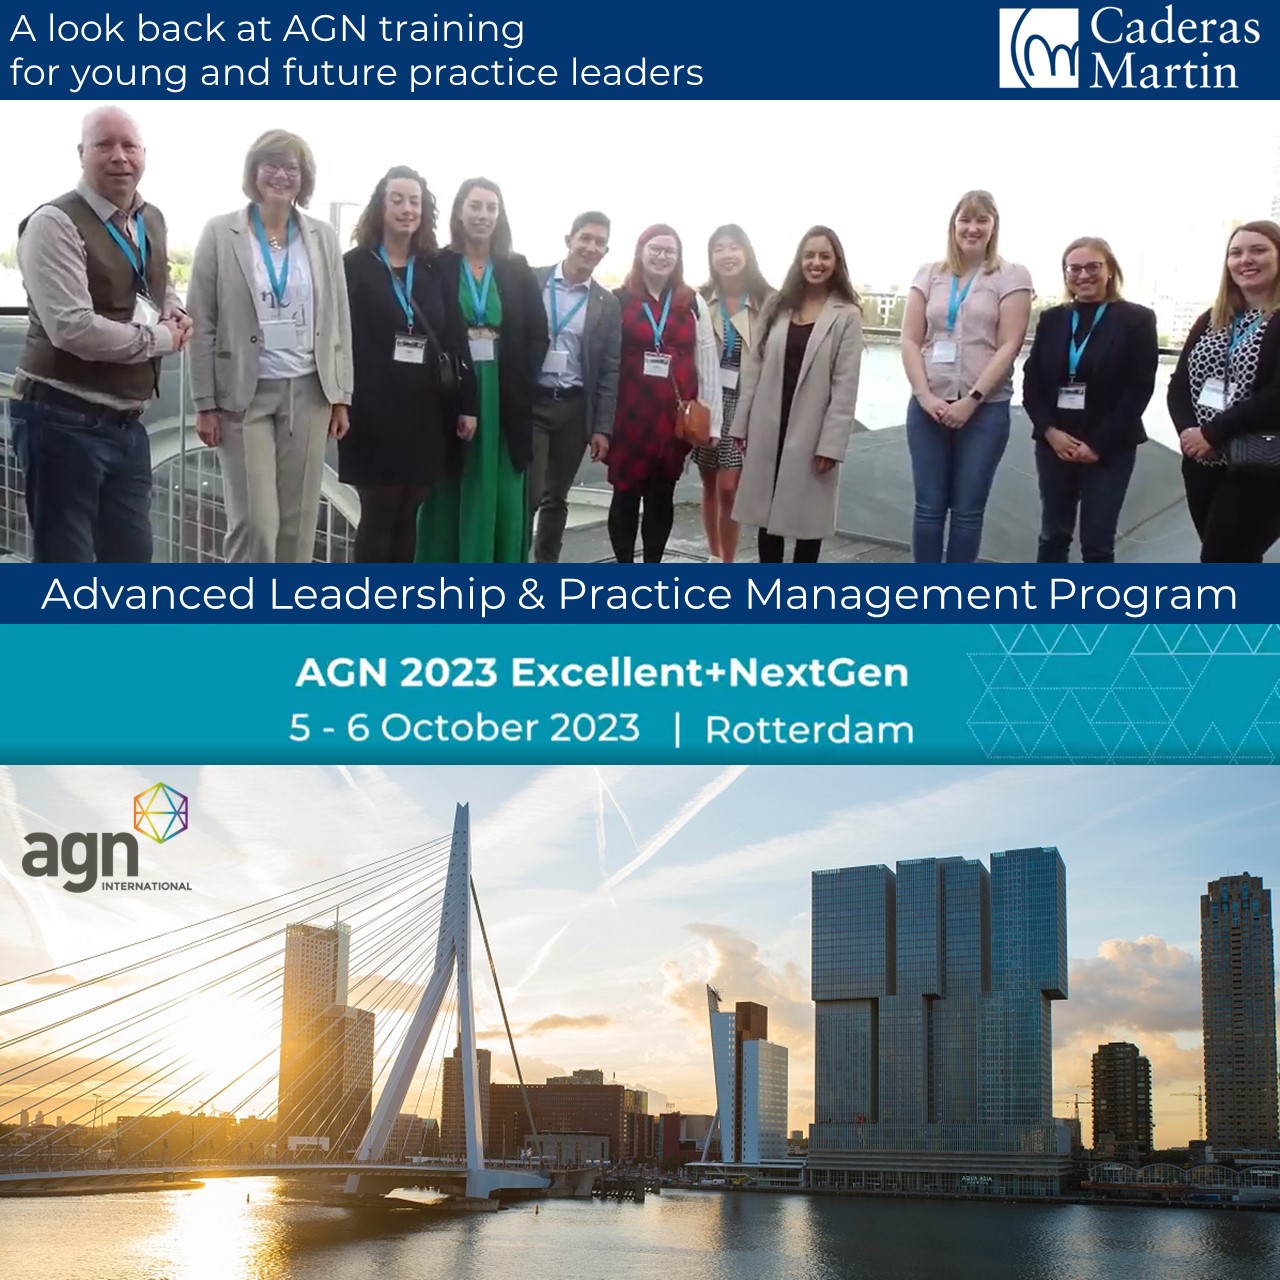 AGN Excellent + 2023 regional meeting Between training and conferences, an event not to be missed...